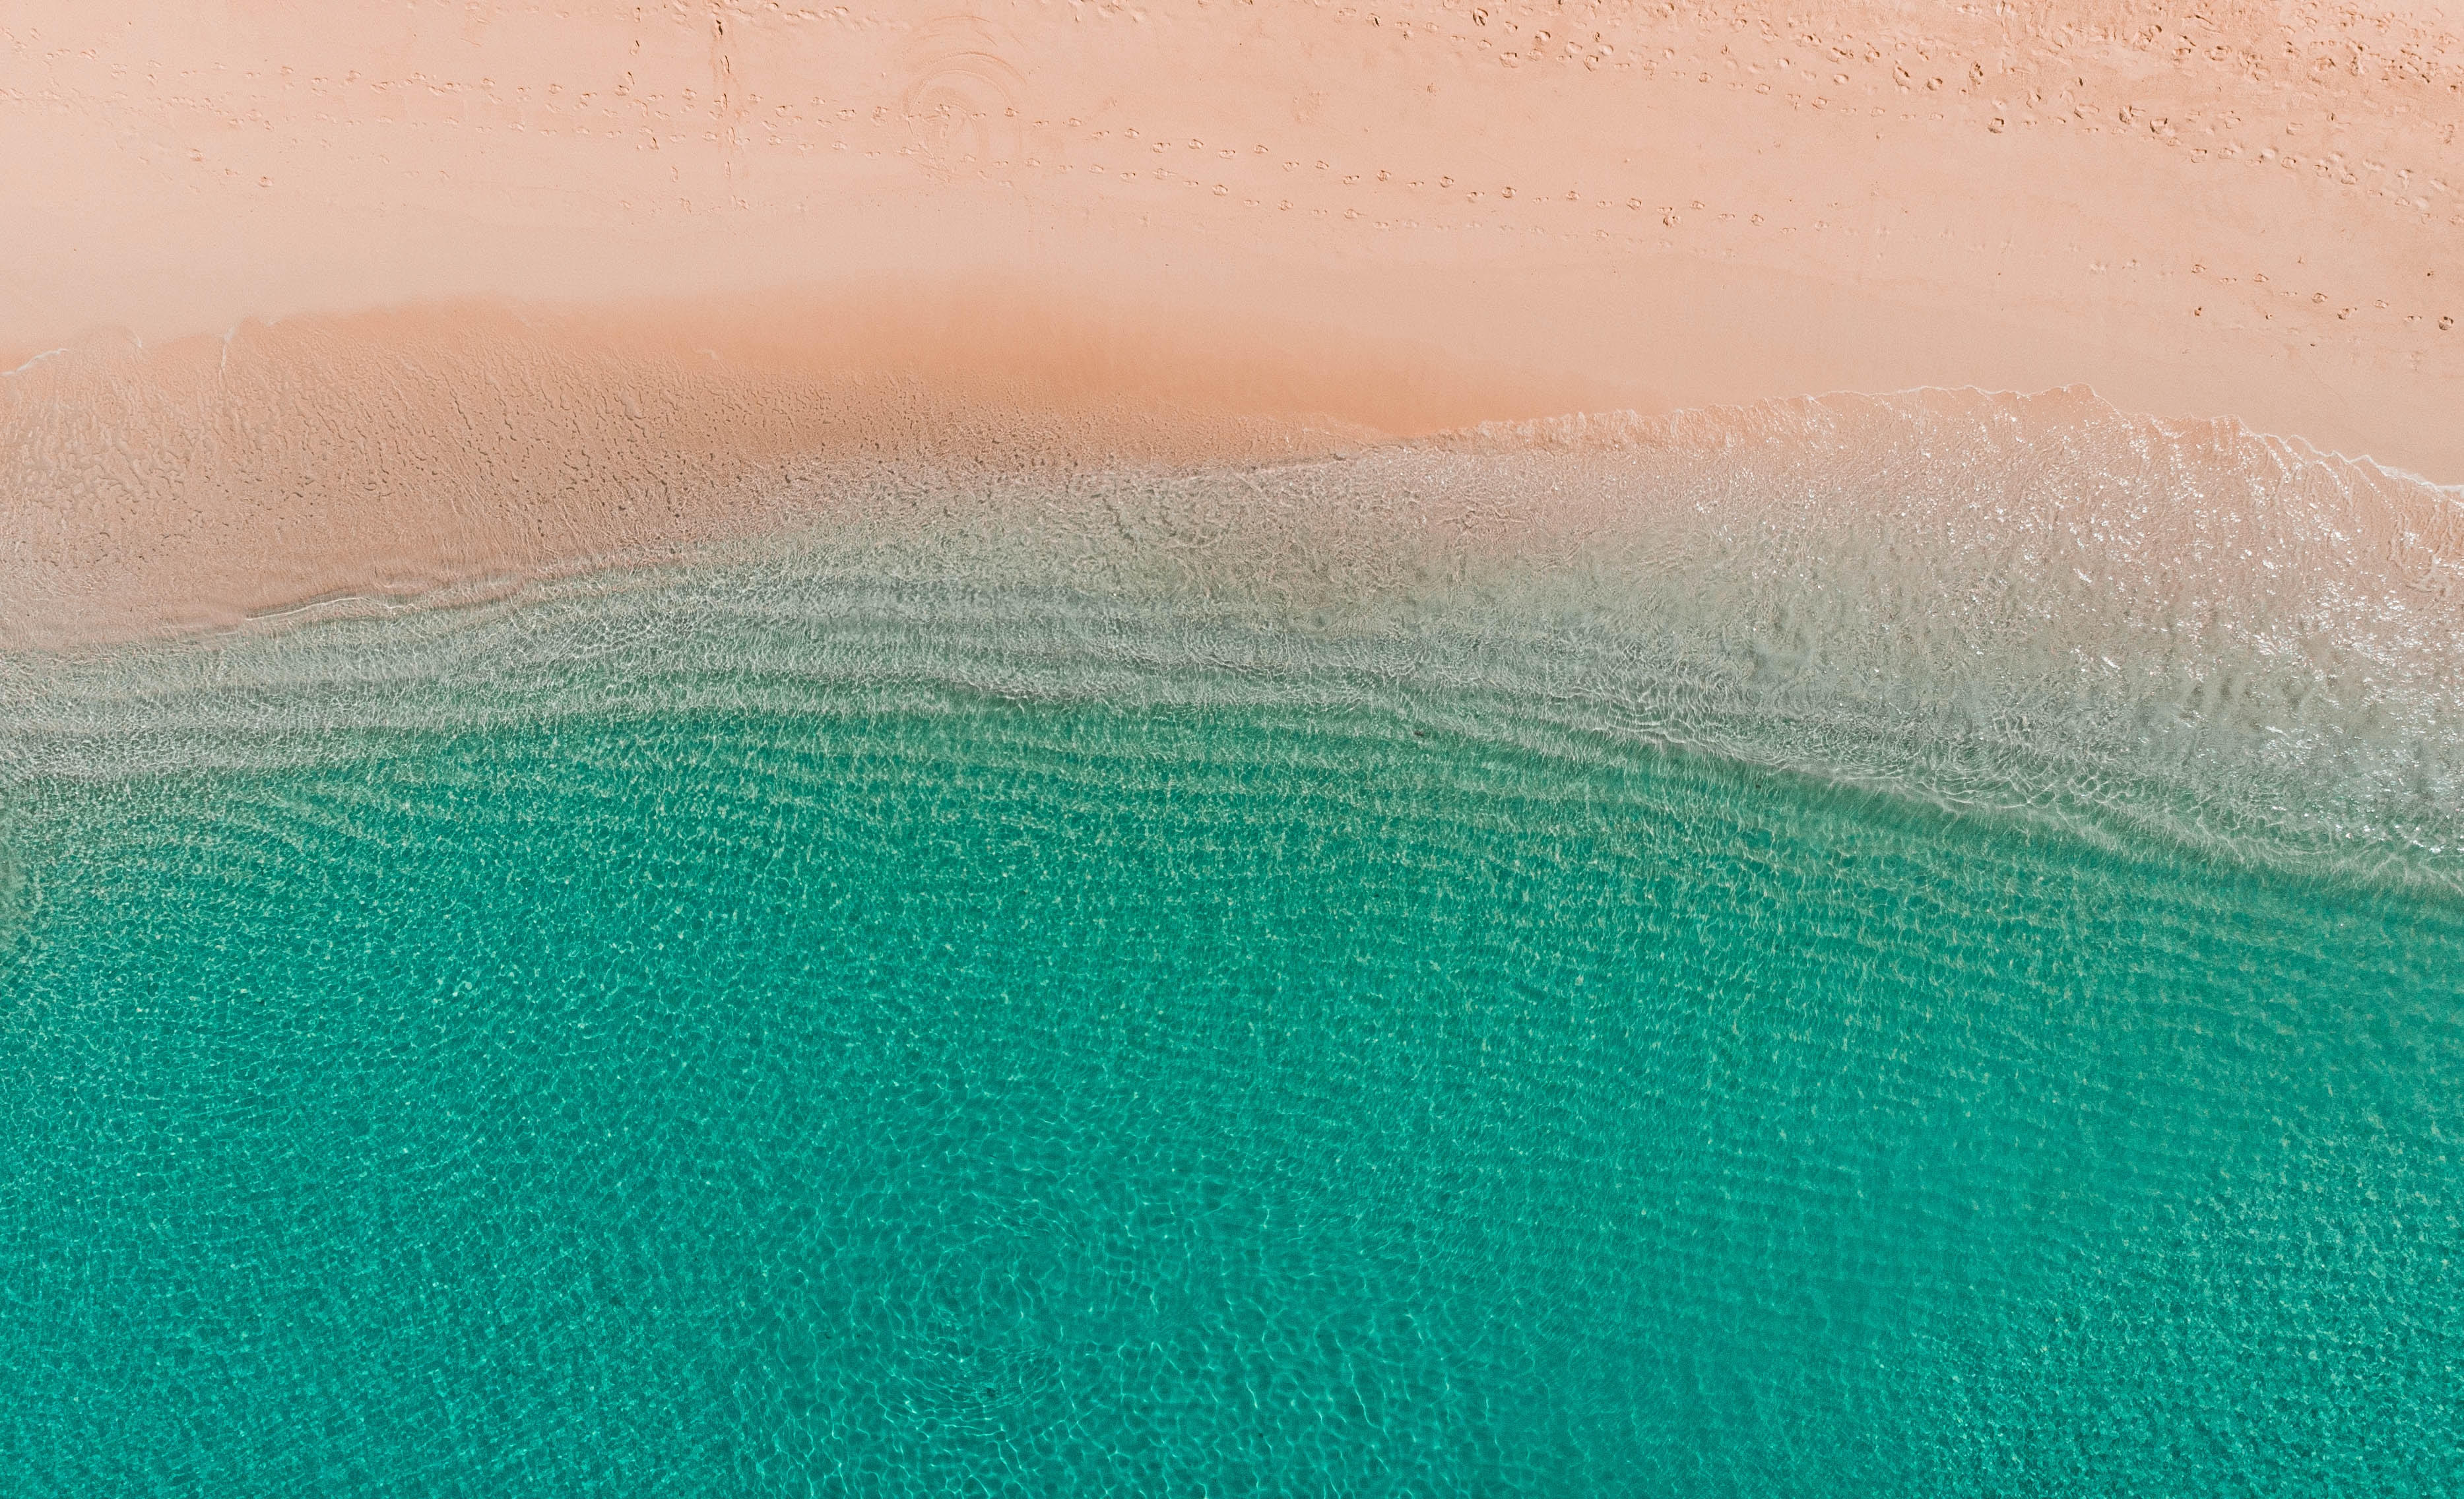 sand, beach, nature, water, sea, view from above High Definition image